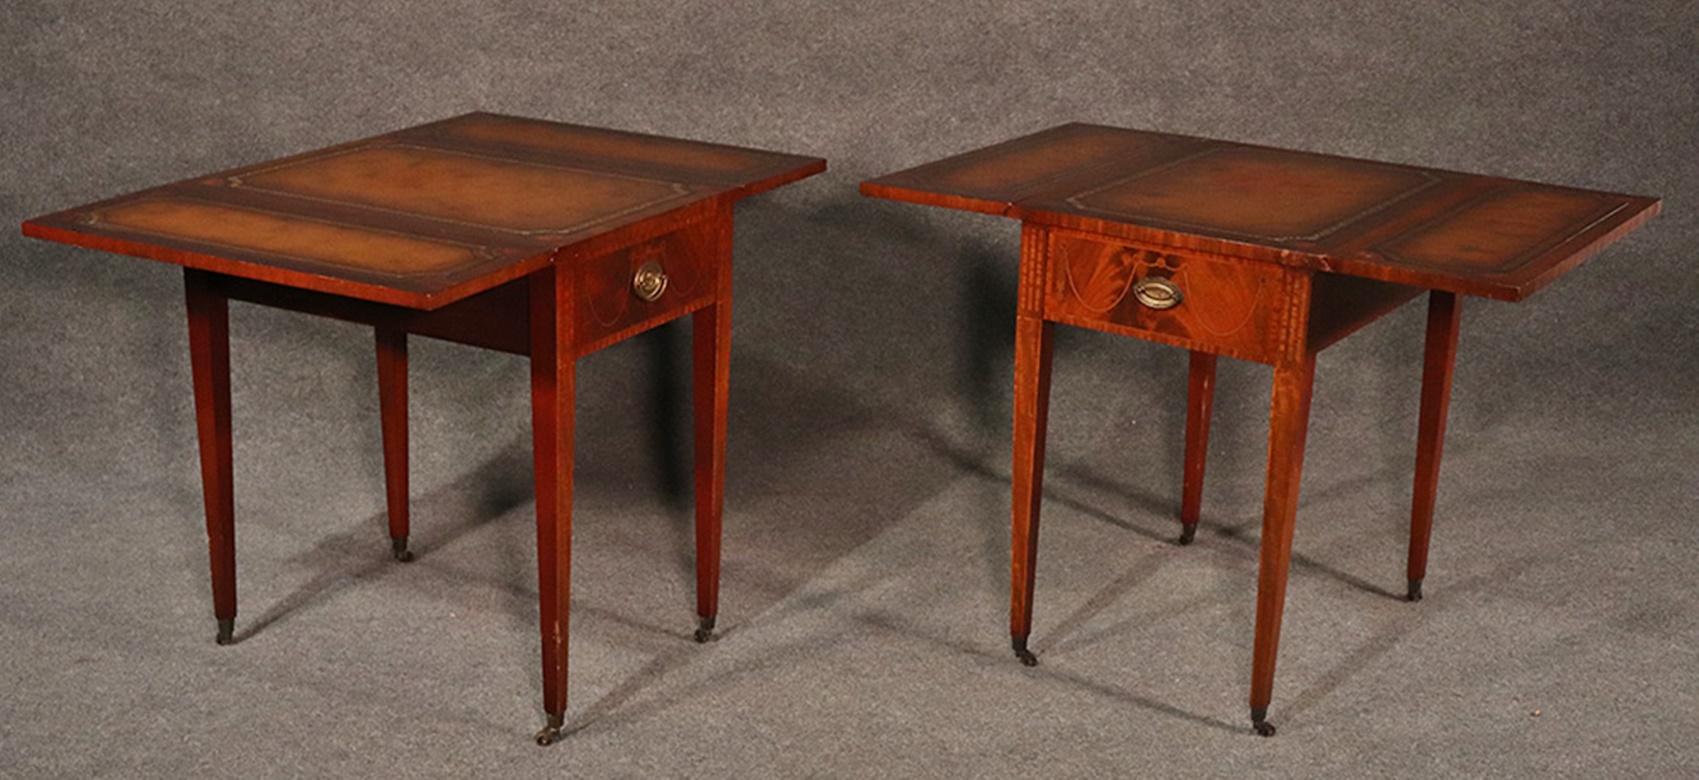 Pair of Sheraton Style Inlaid Mahogany Leather Top Pembroke Tables 2